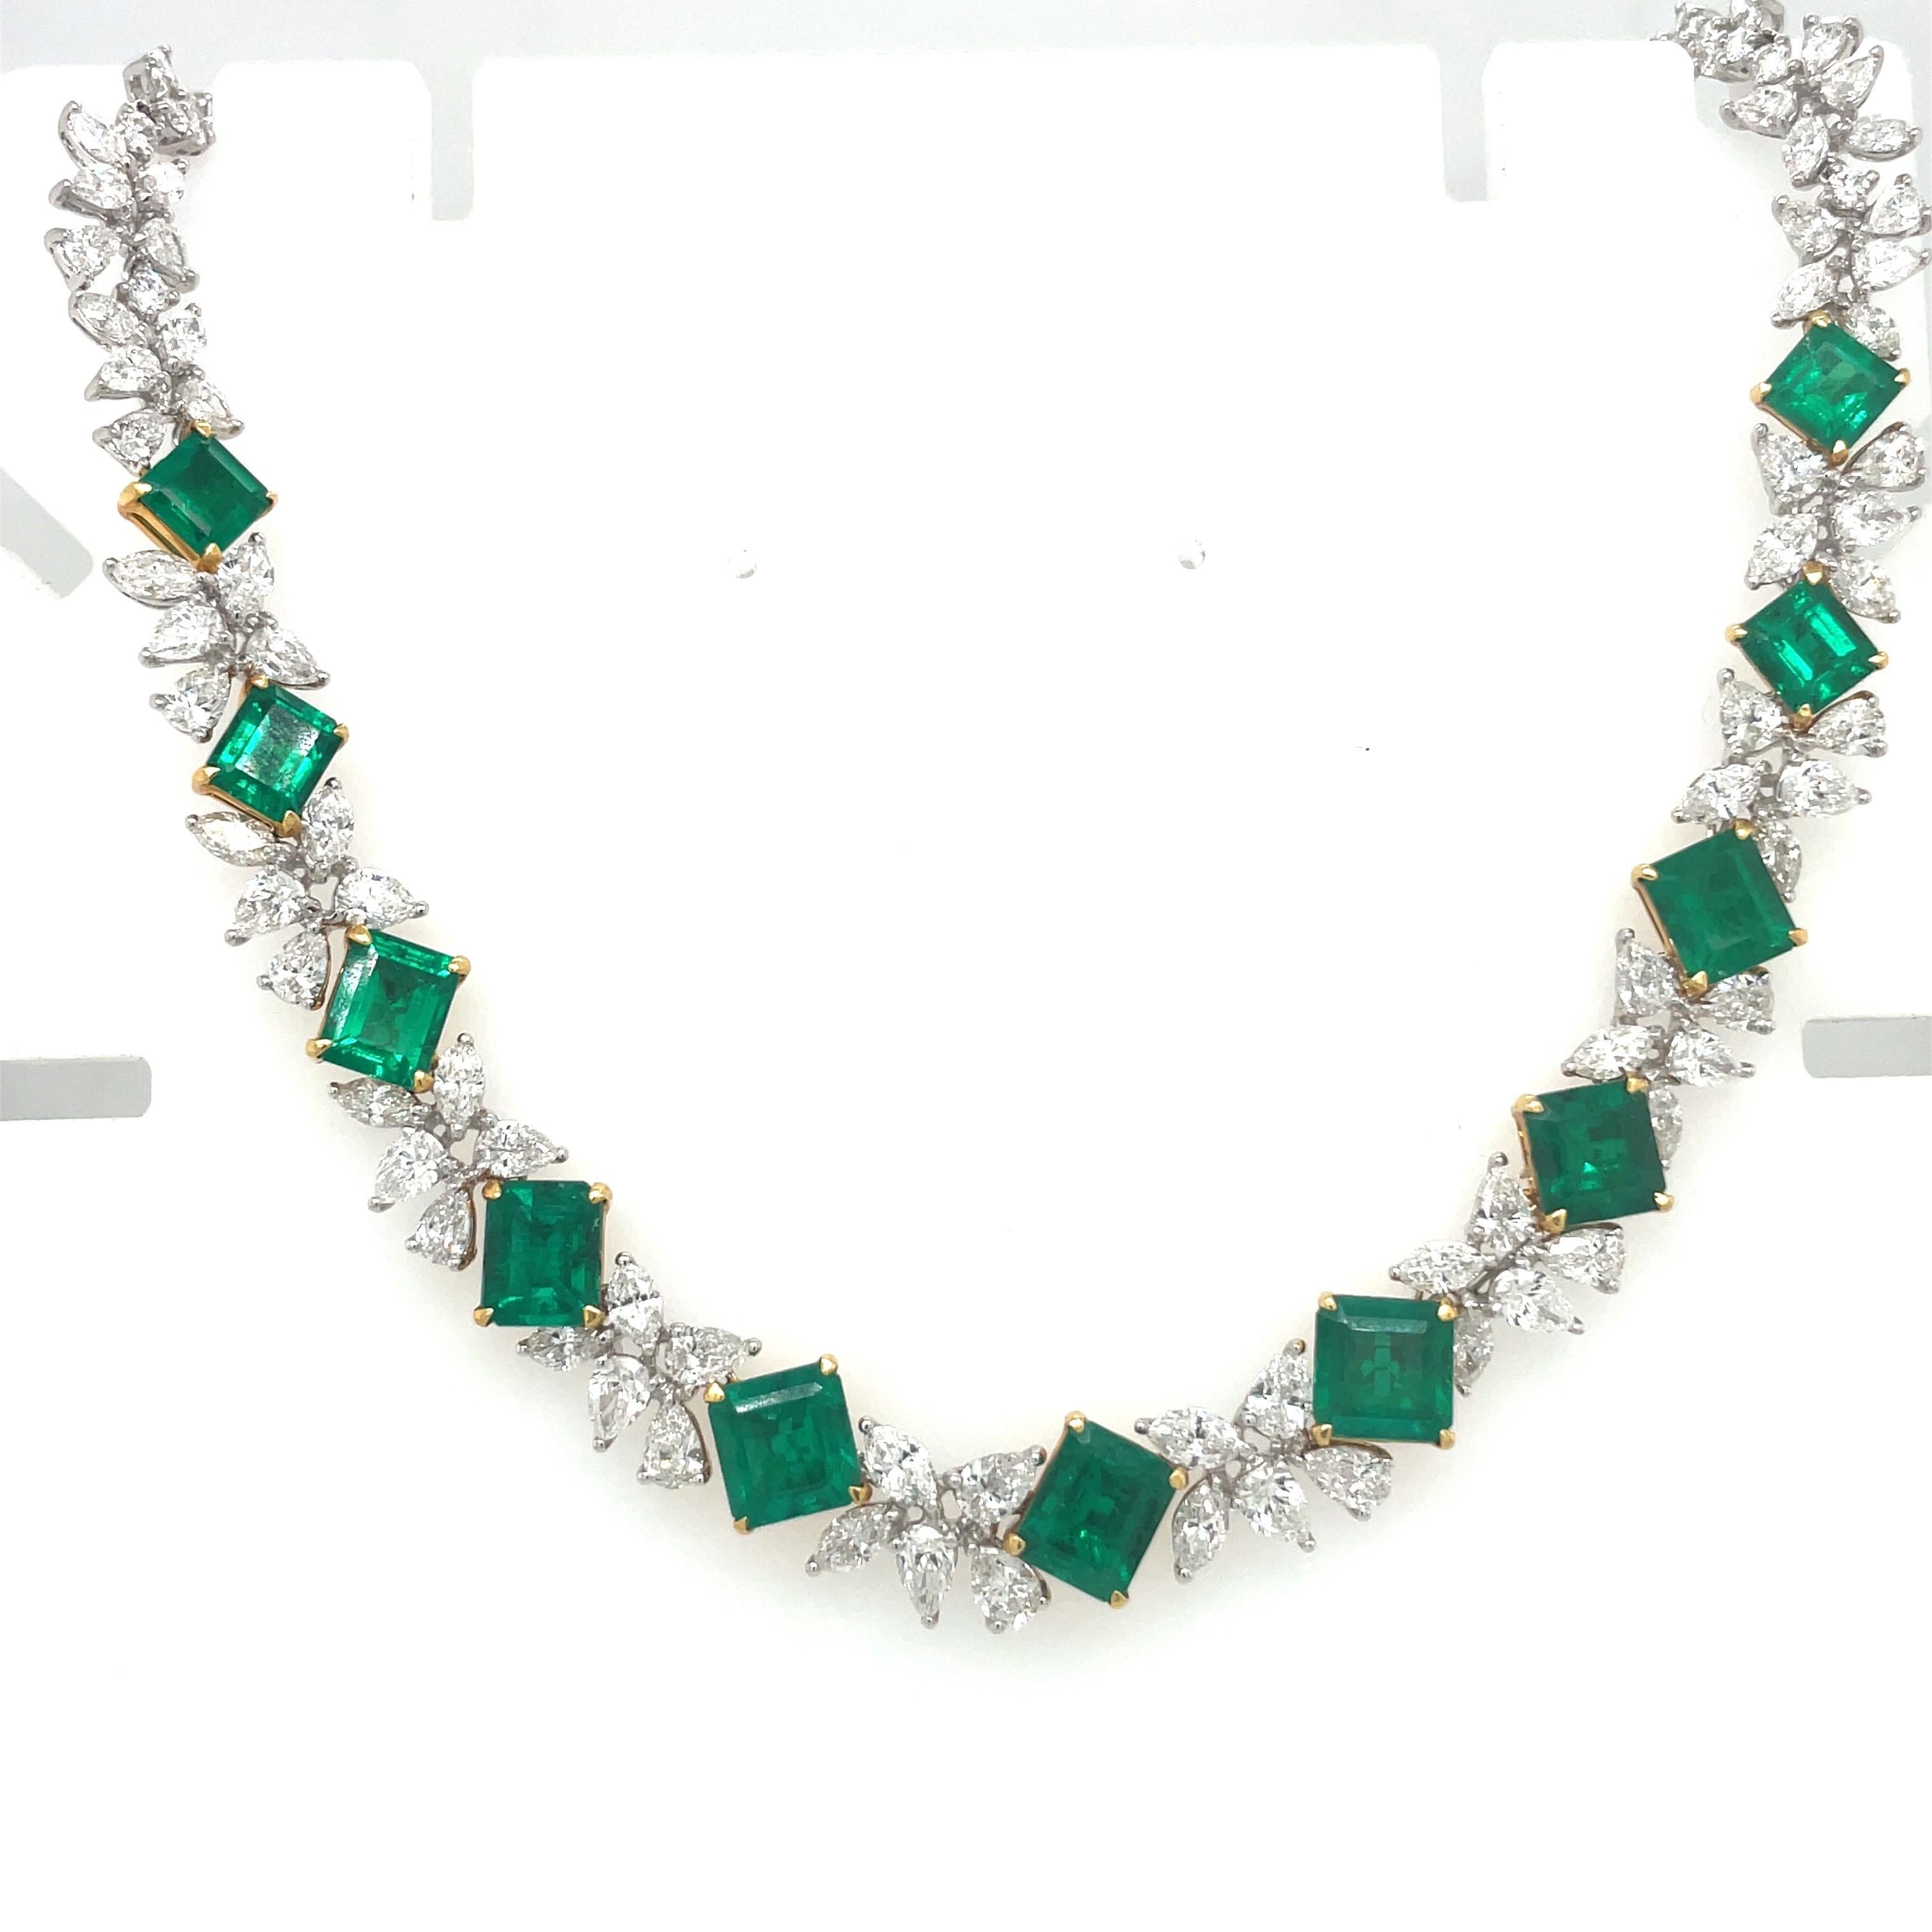 Exceptionally beautiful emerald and diamond necklace. The centerpiece of this necklace is set with 11 square and rectangular emeralds. Round, marquis and pear shaped diamonds encompass the entire 17